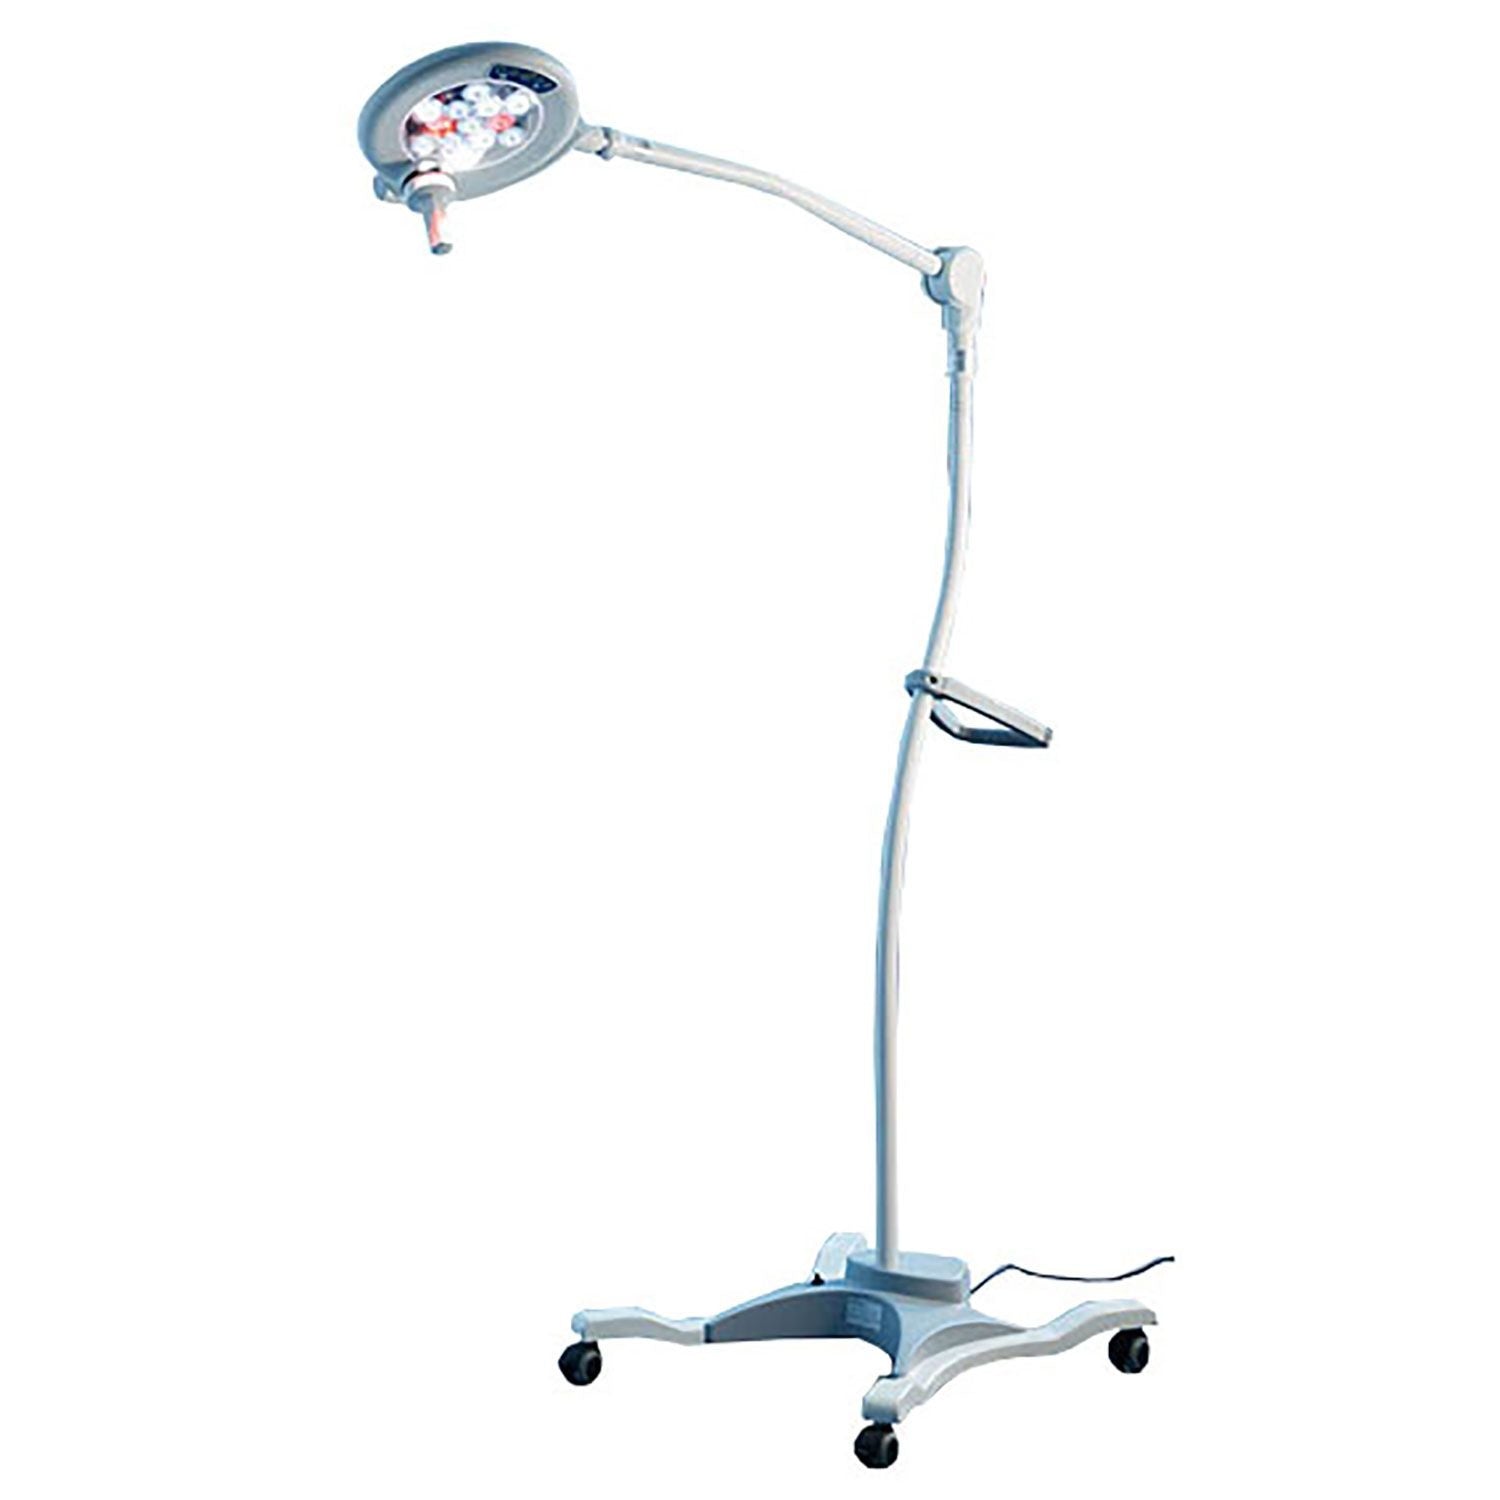 Astralite ALE10 Mobile Light (100 KLux) (1)